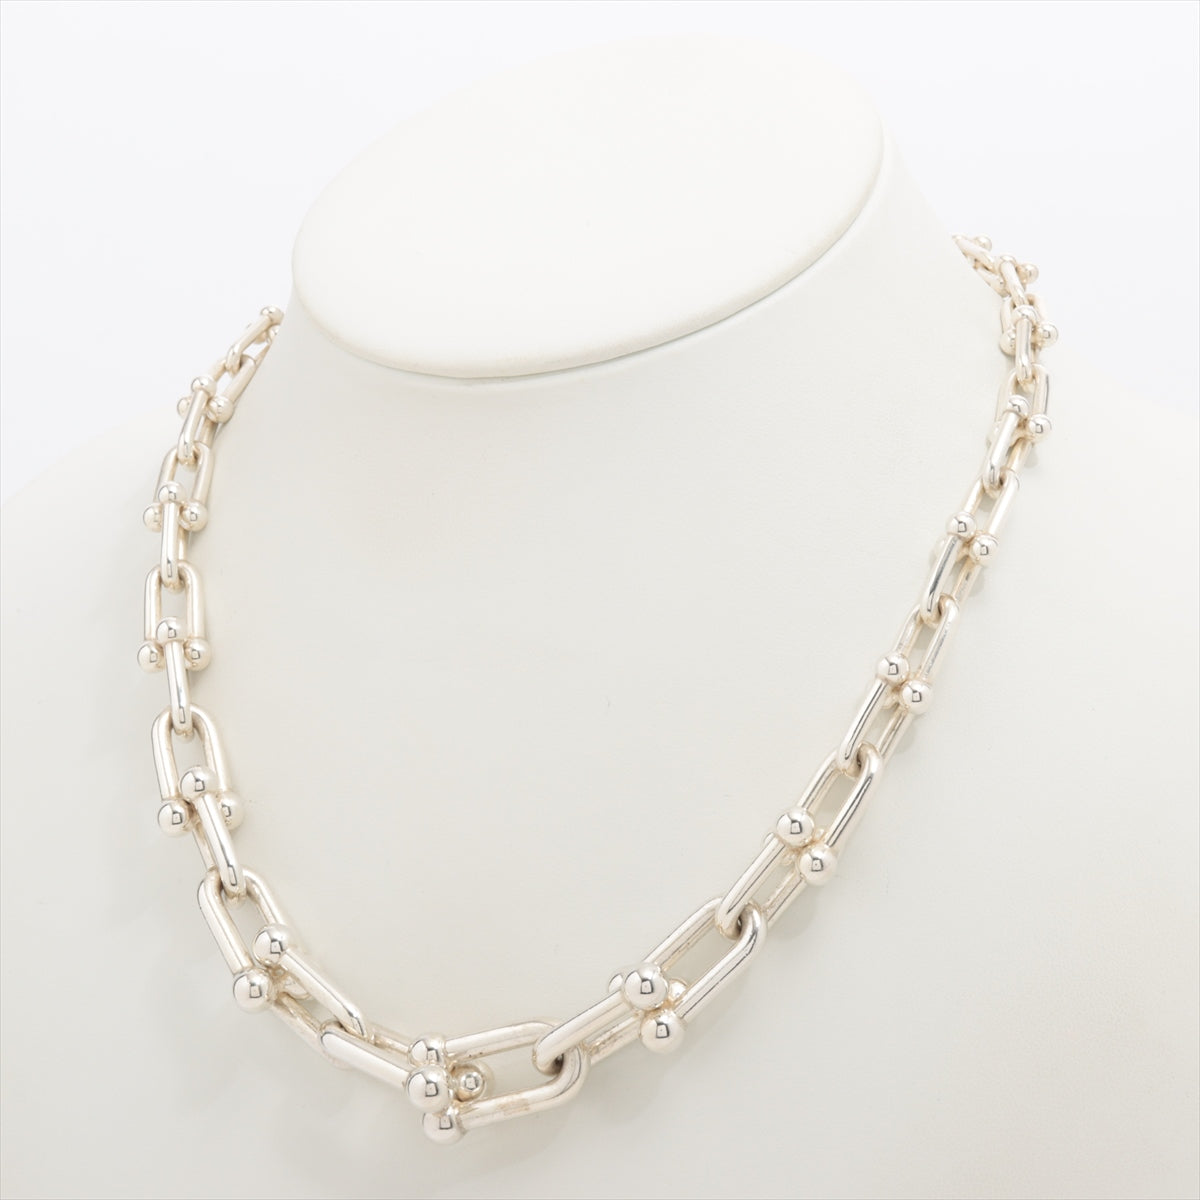 Tiffany Hardware Graduated rink Necklace 925 108.5g Silver